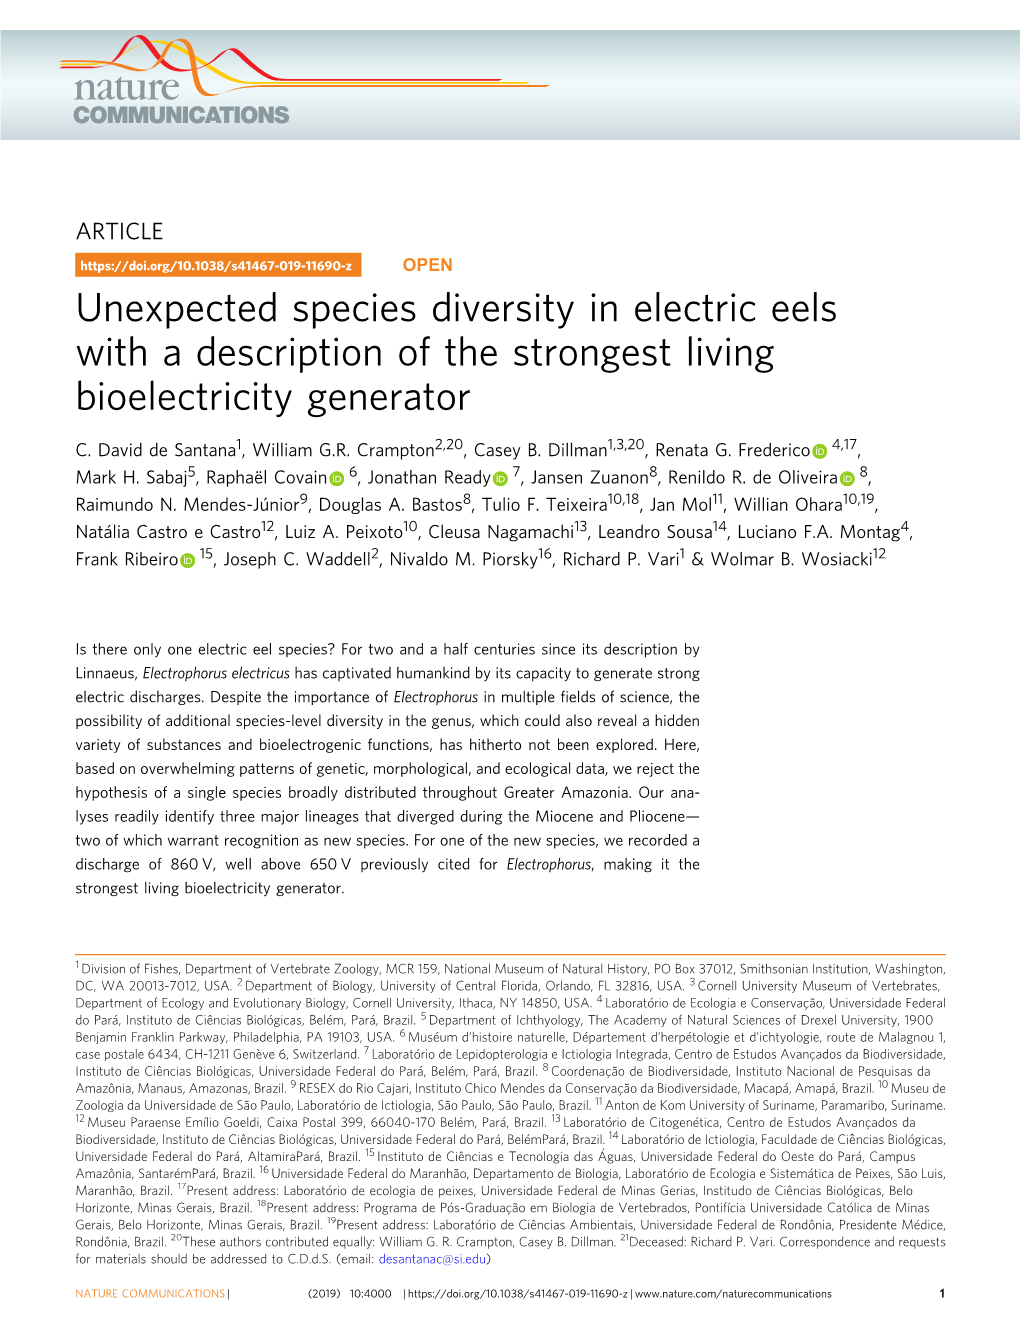 Unexpected Species Diversity in Electric Eels with a Description of the Strongest Living Bioelectricity Generator